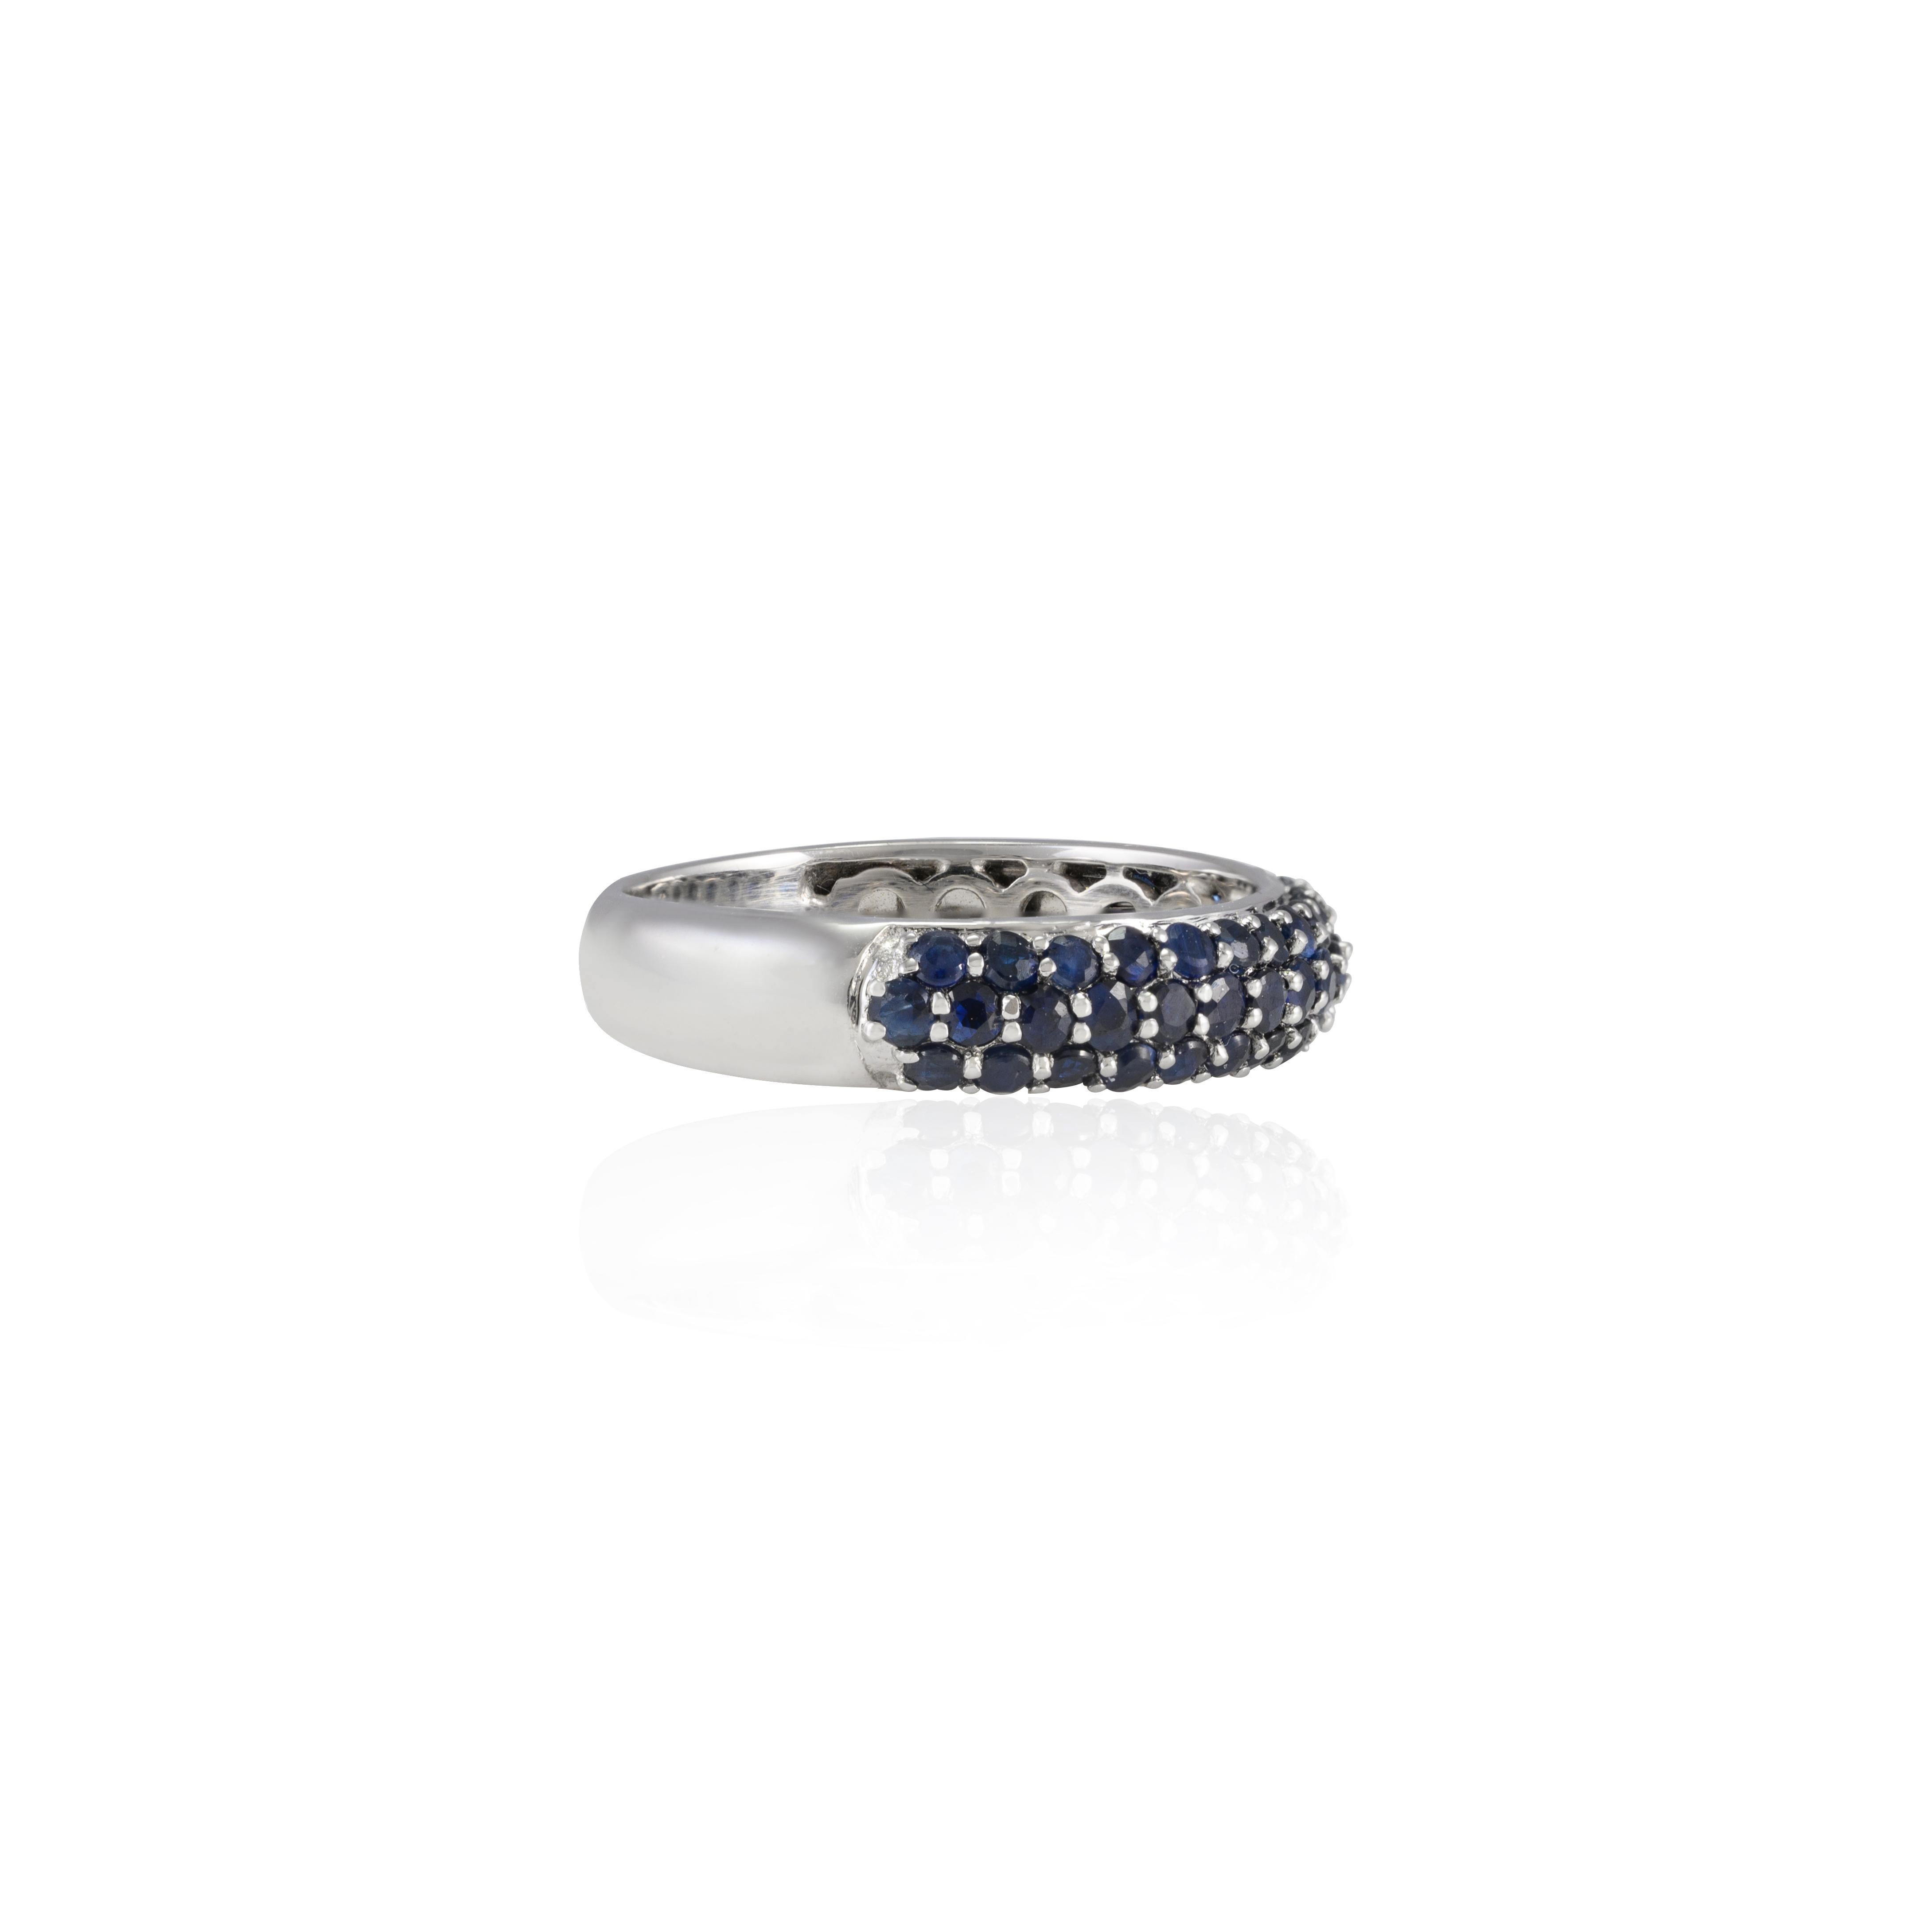 For Sale:  18k Solid White Gold 1.3 Ct Pave Set Deep Blue Sapphire Dome Ring Eternity Band  4